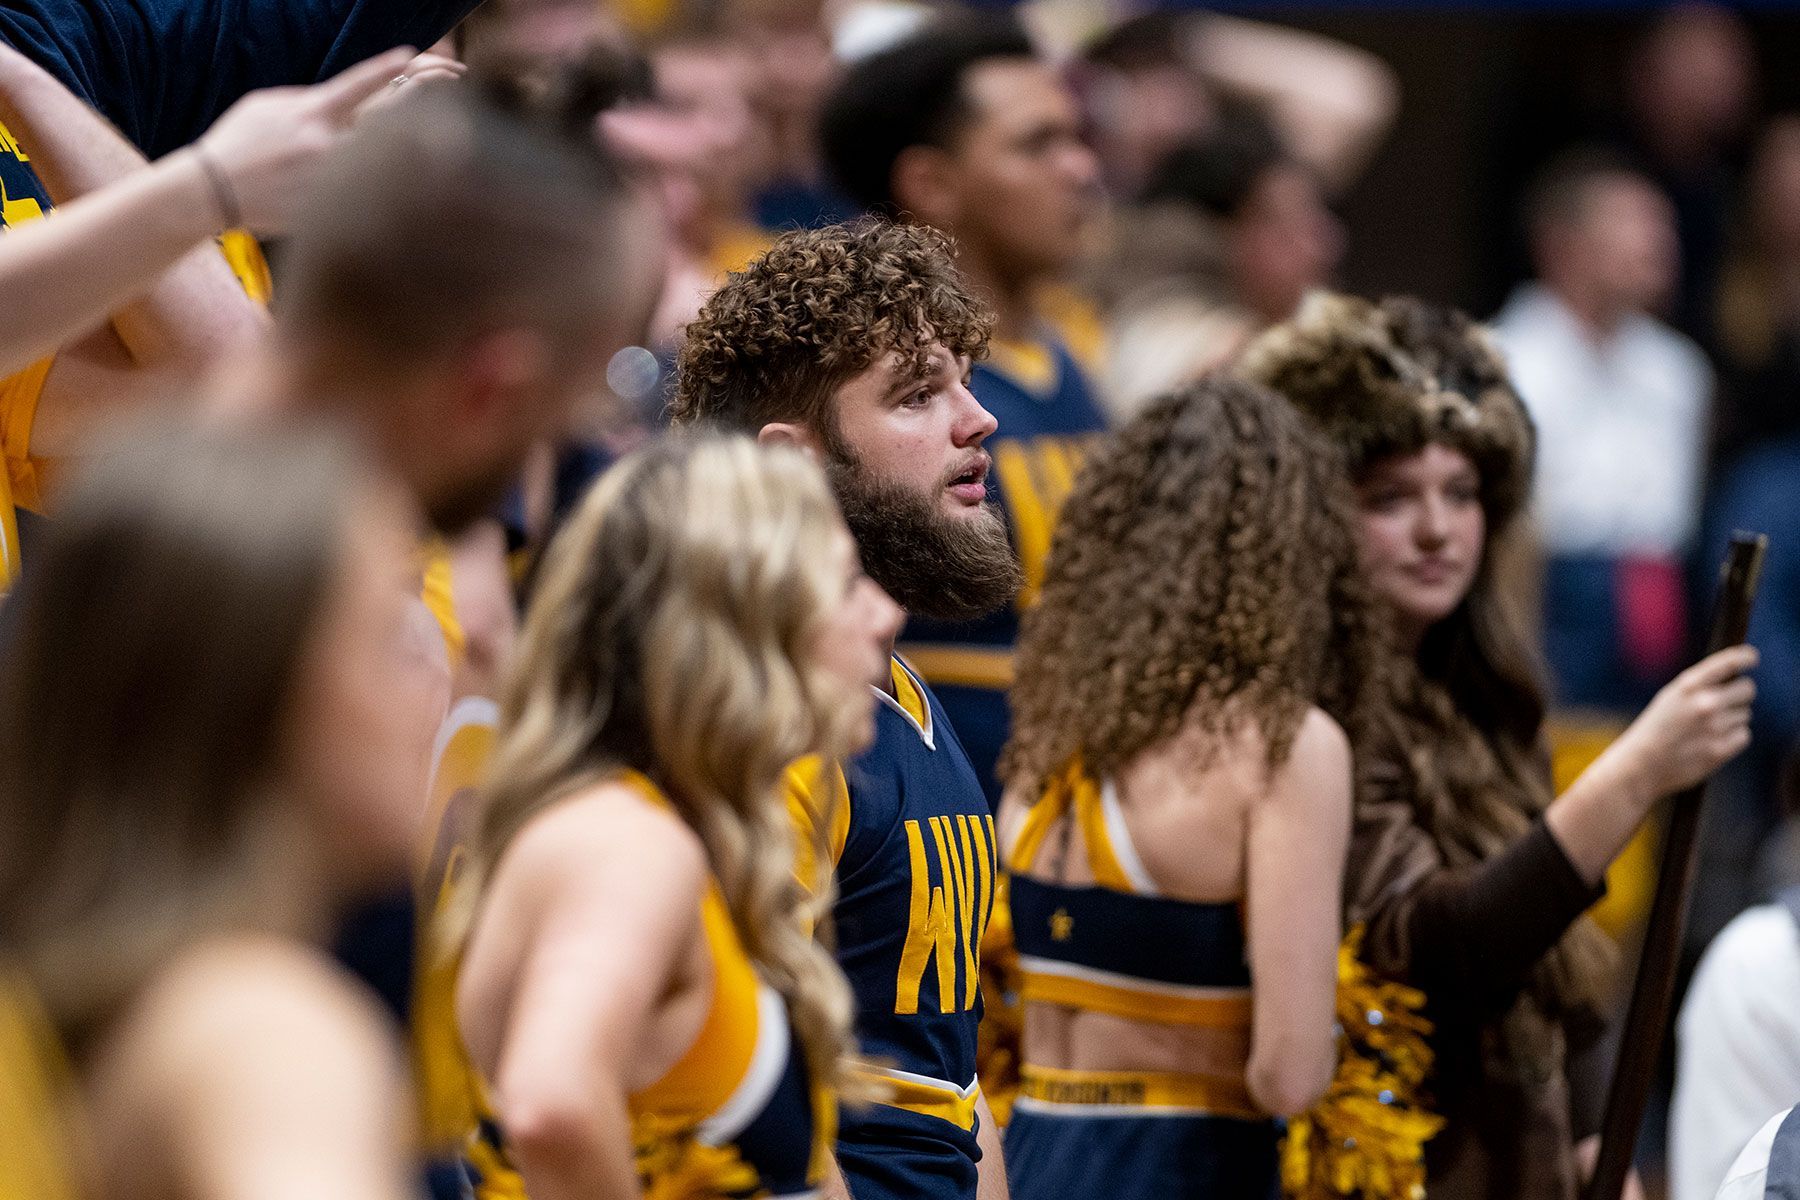 Mikel Hager in the crowd as a cheerleader at a WVU basketball game